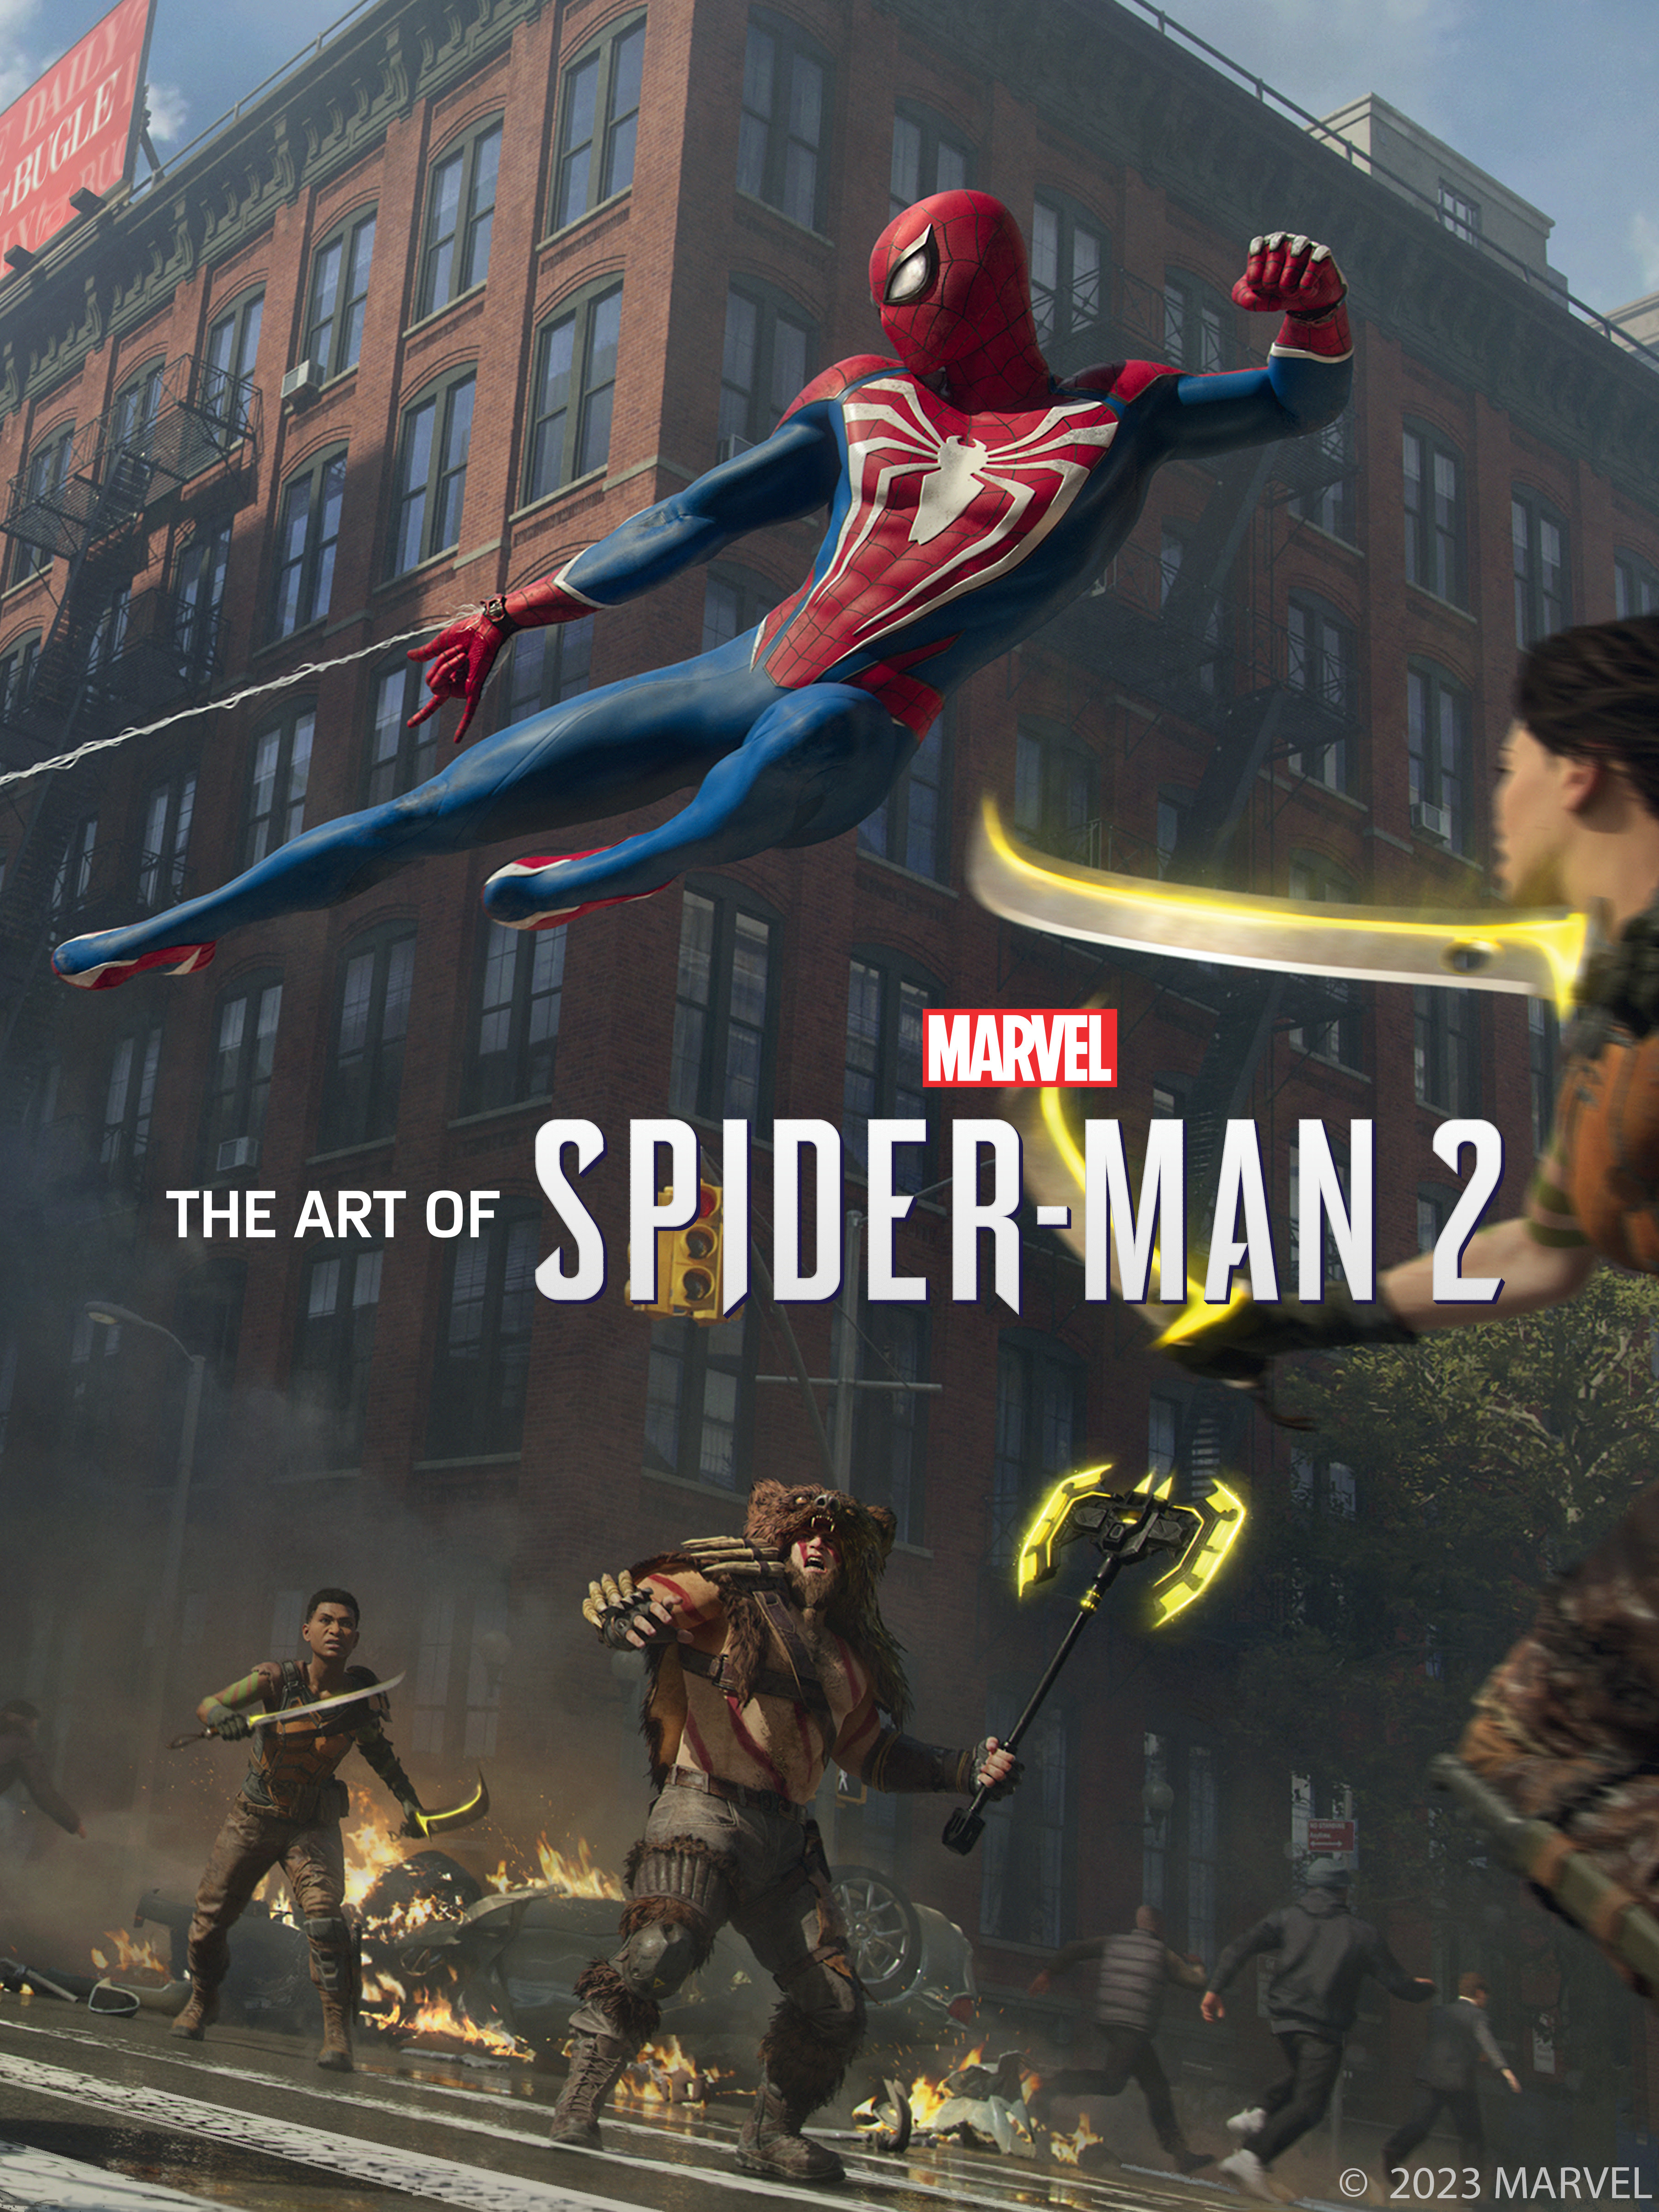 The Art of Spider-Man 2